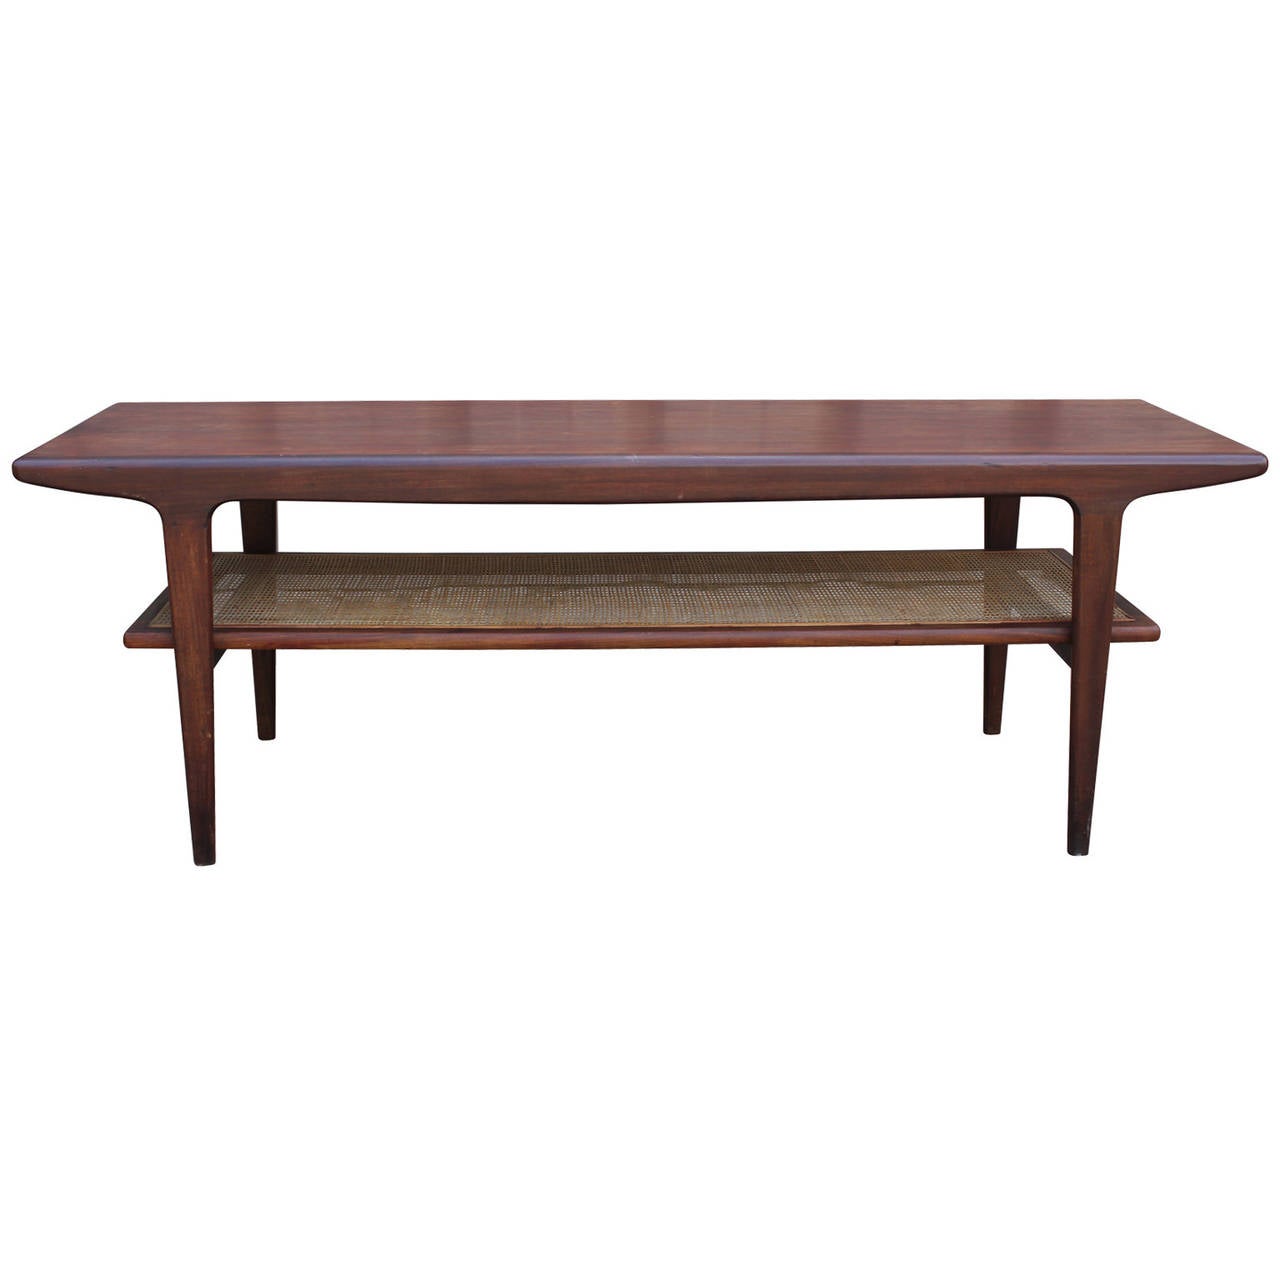 Beautiful Danish Coffee table with a cane shelf. Table has a rounded organic feel. In nice vintage condition.